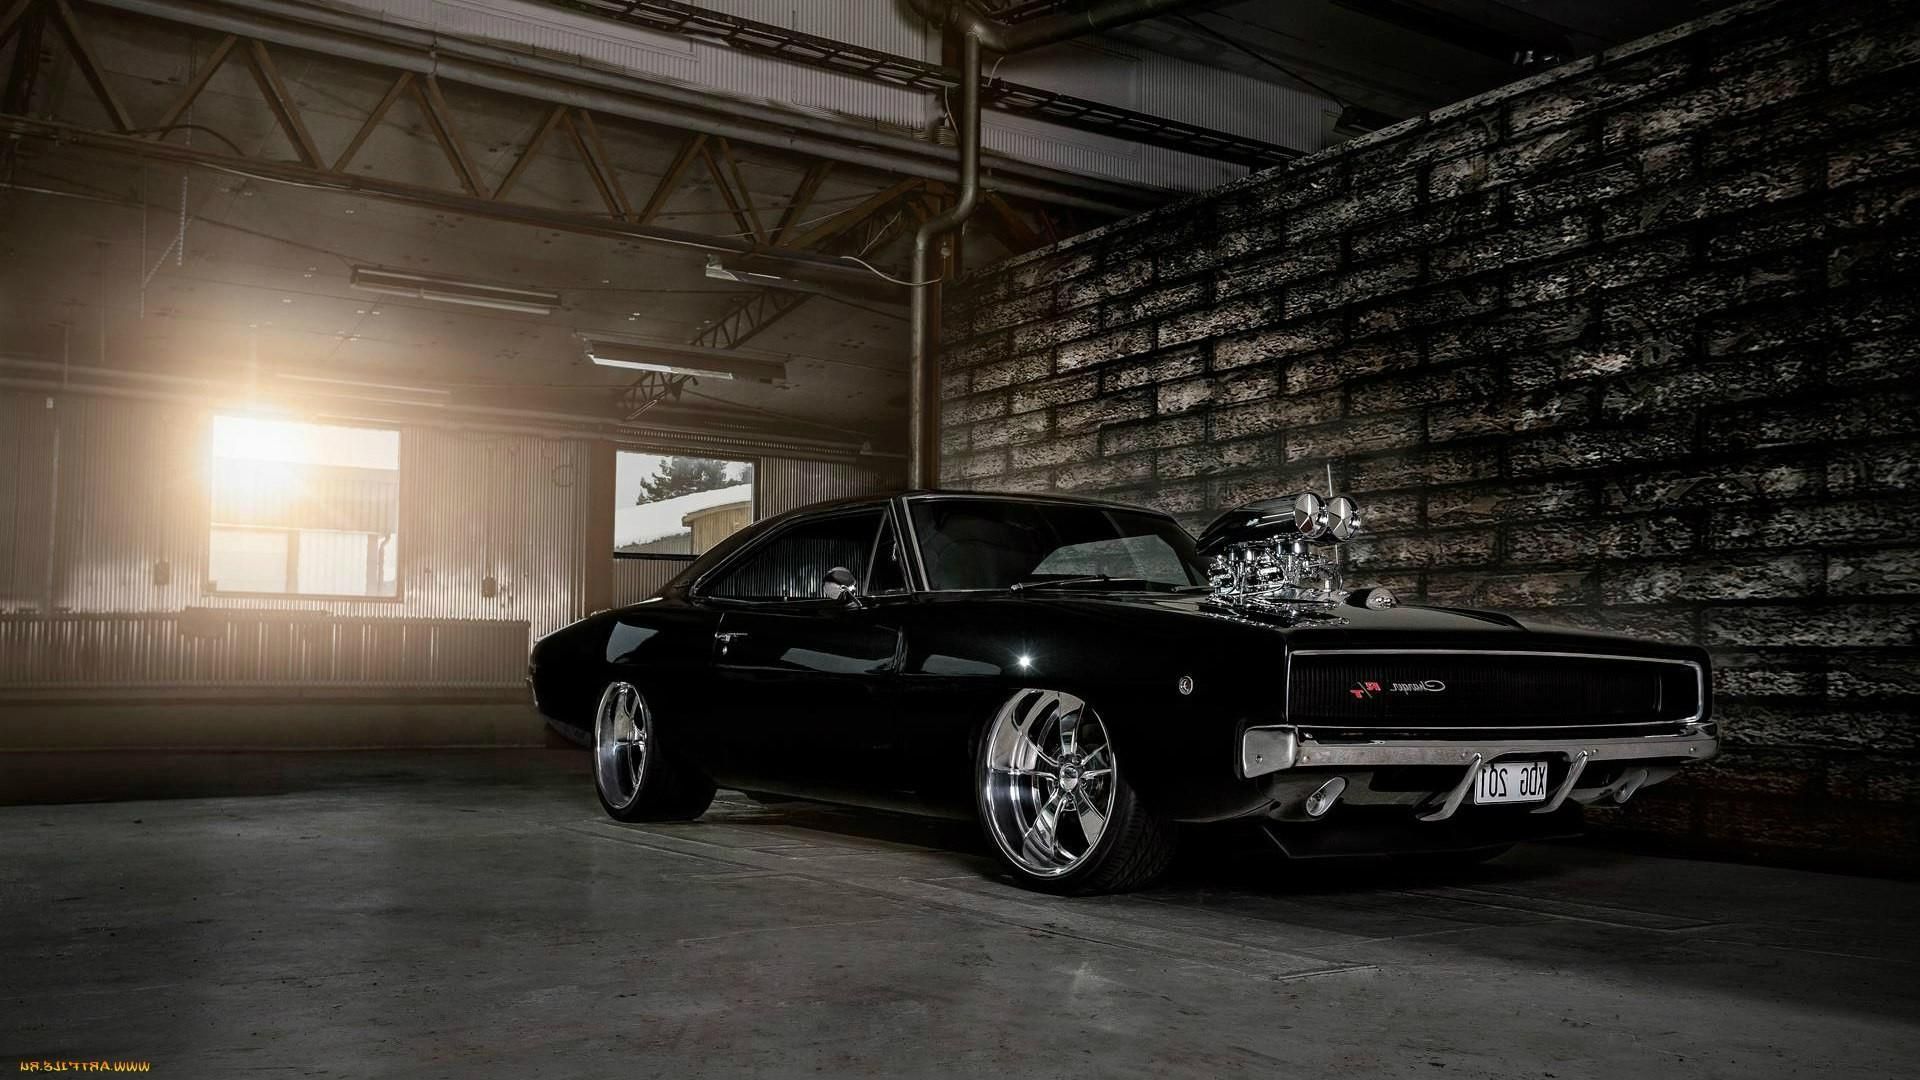 Pics Of A Dodge Charger Wallpaper Wallpaper For Mobile - Vehicle ...